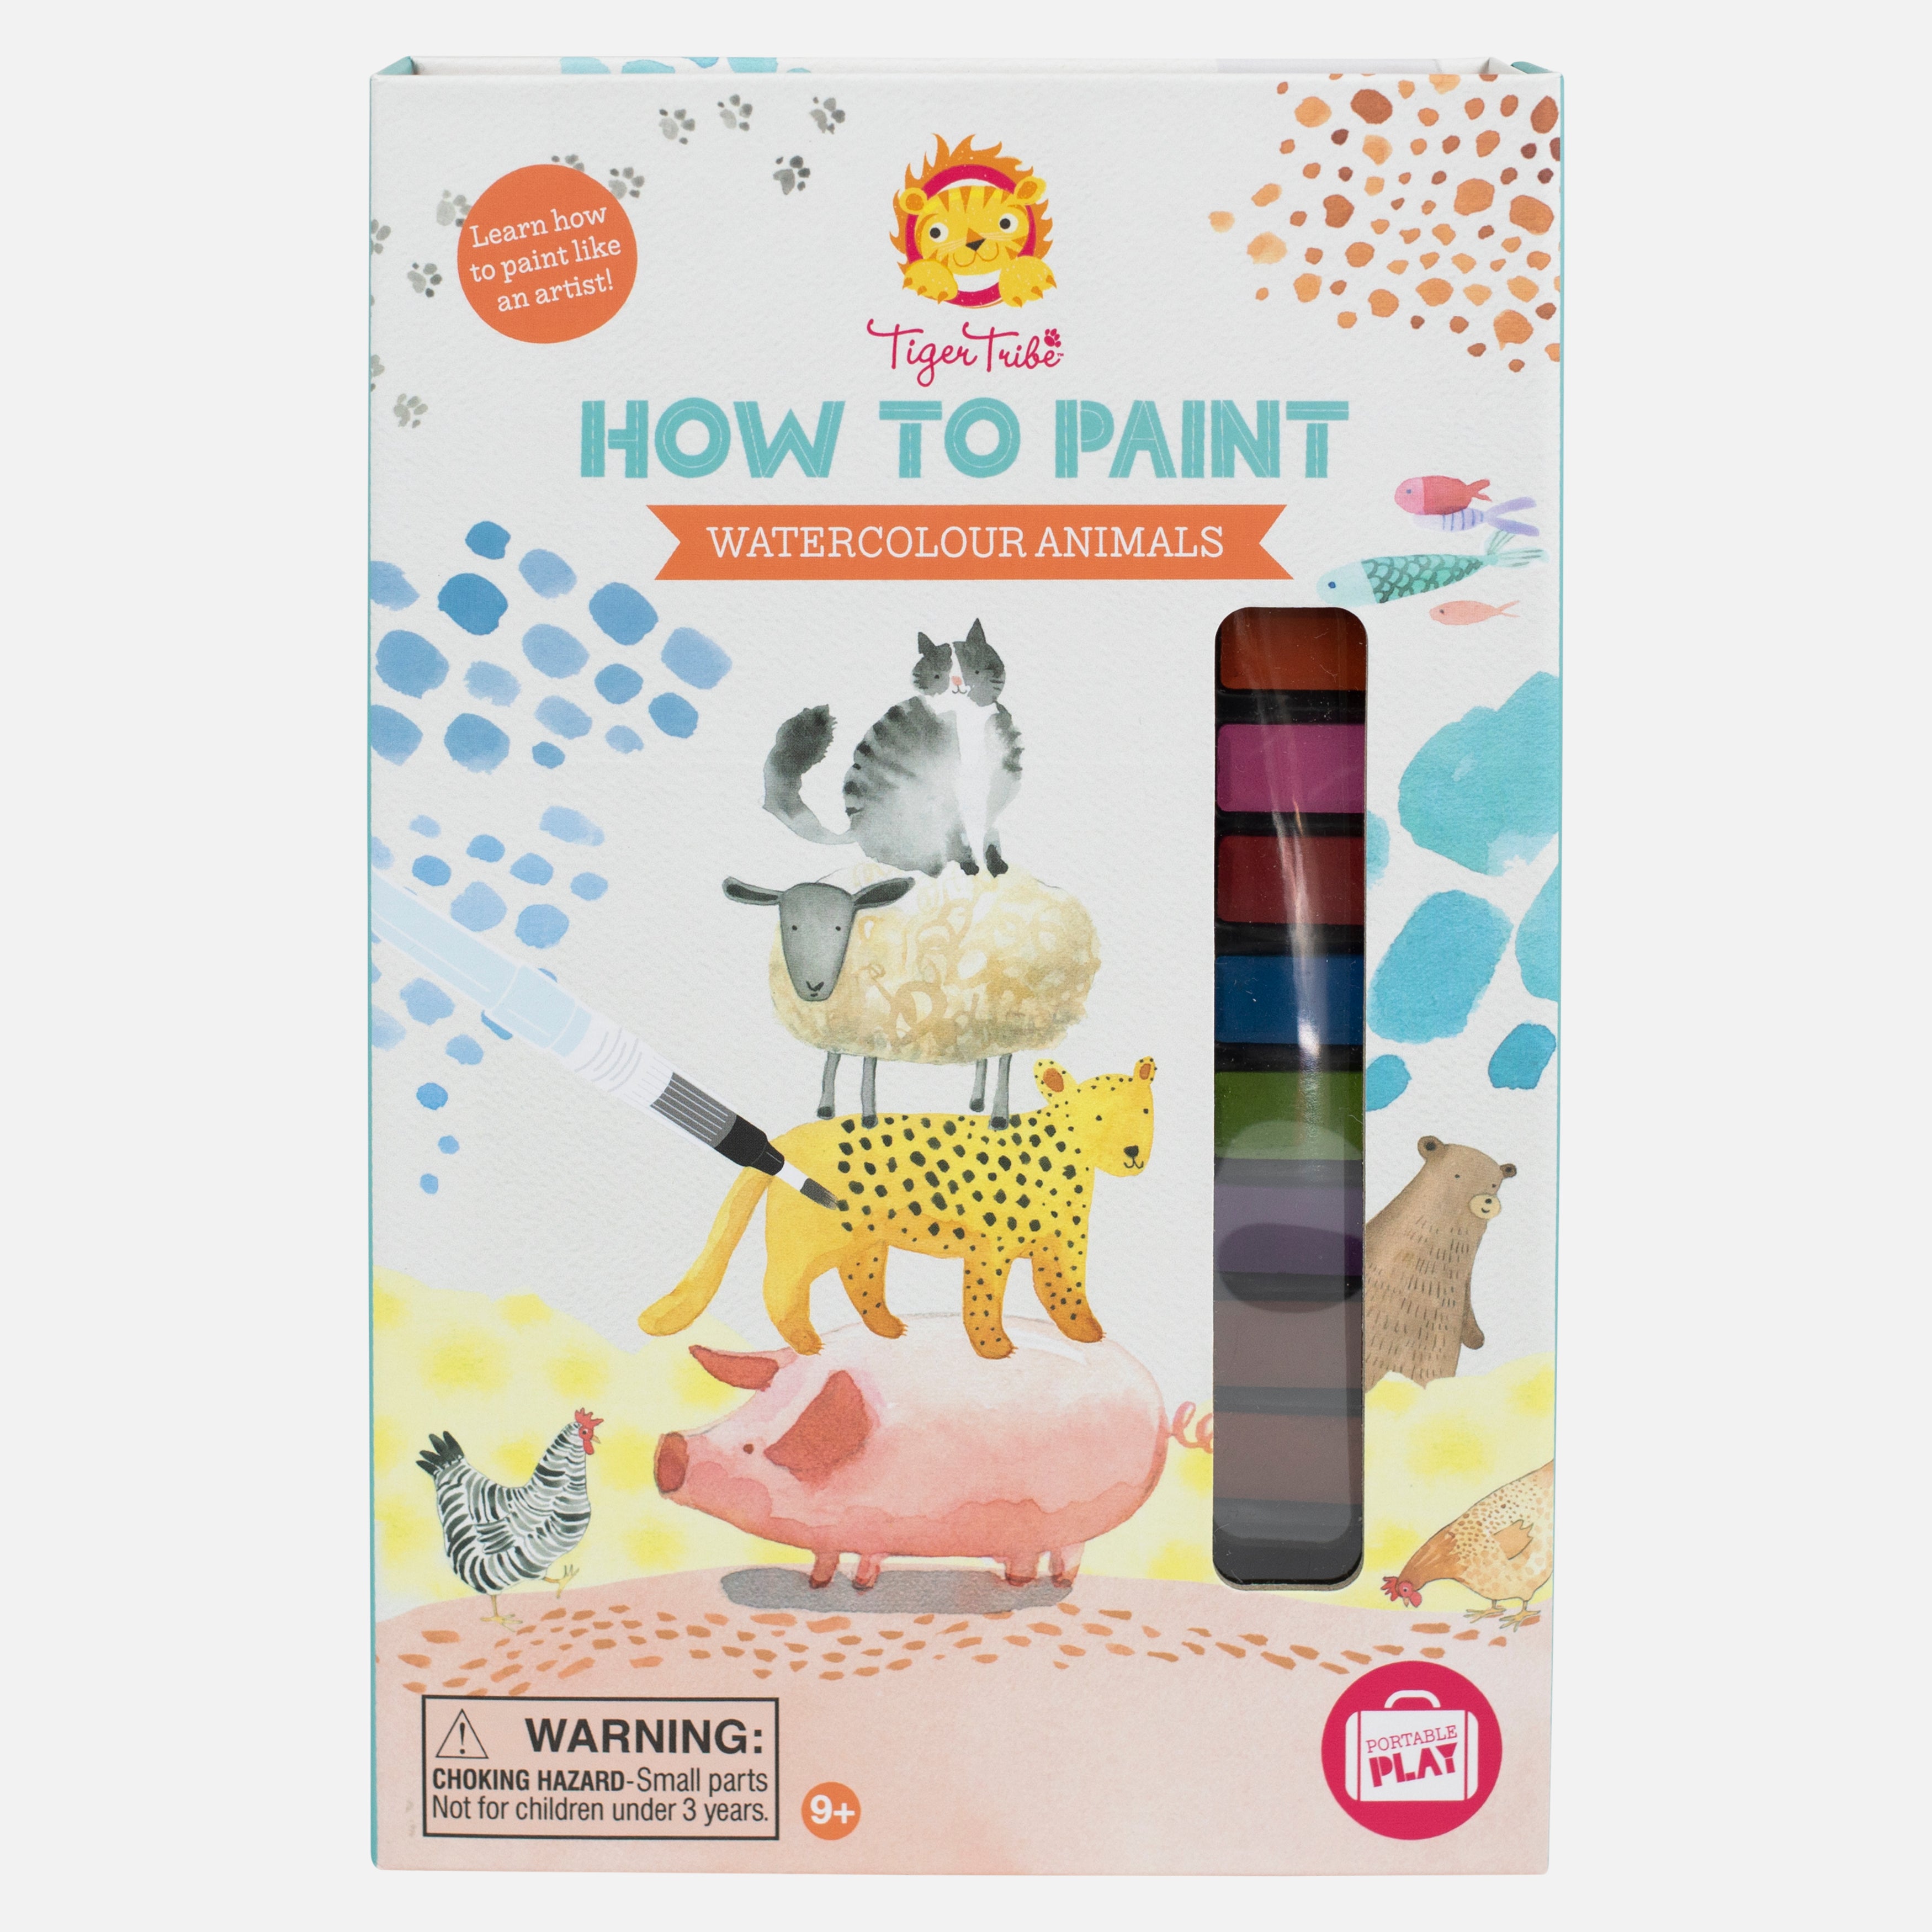 How To Paint Animals - Watercolour